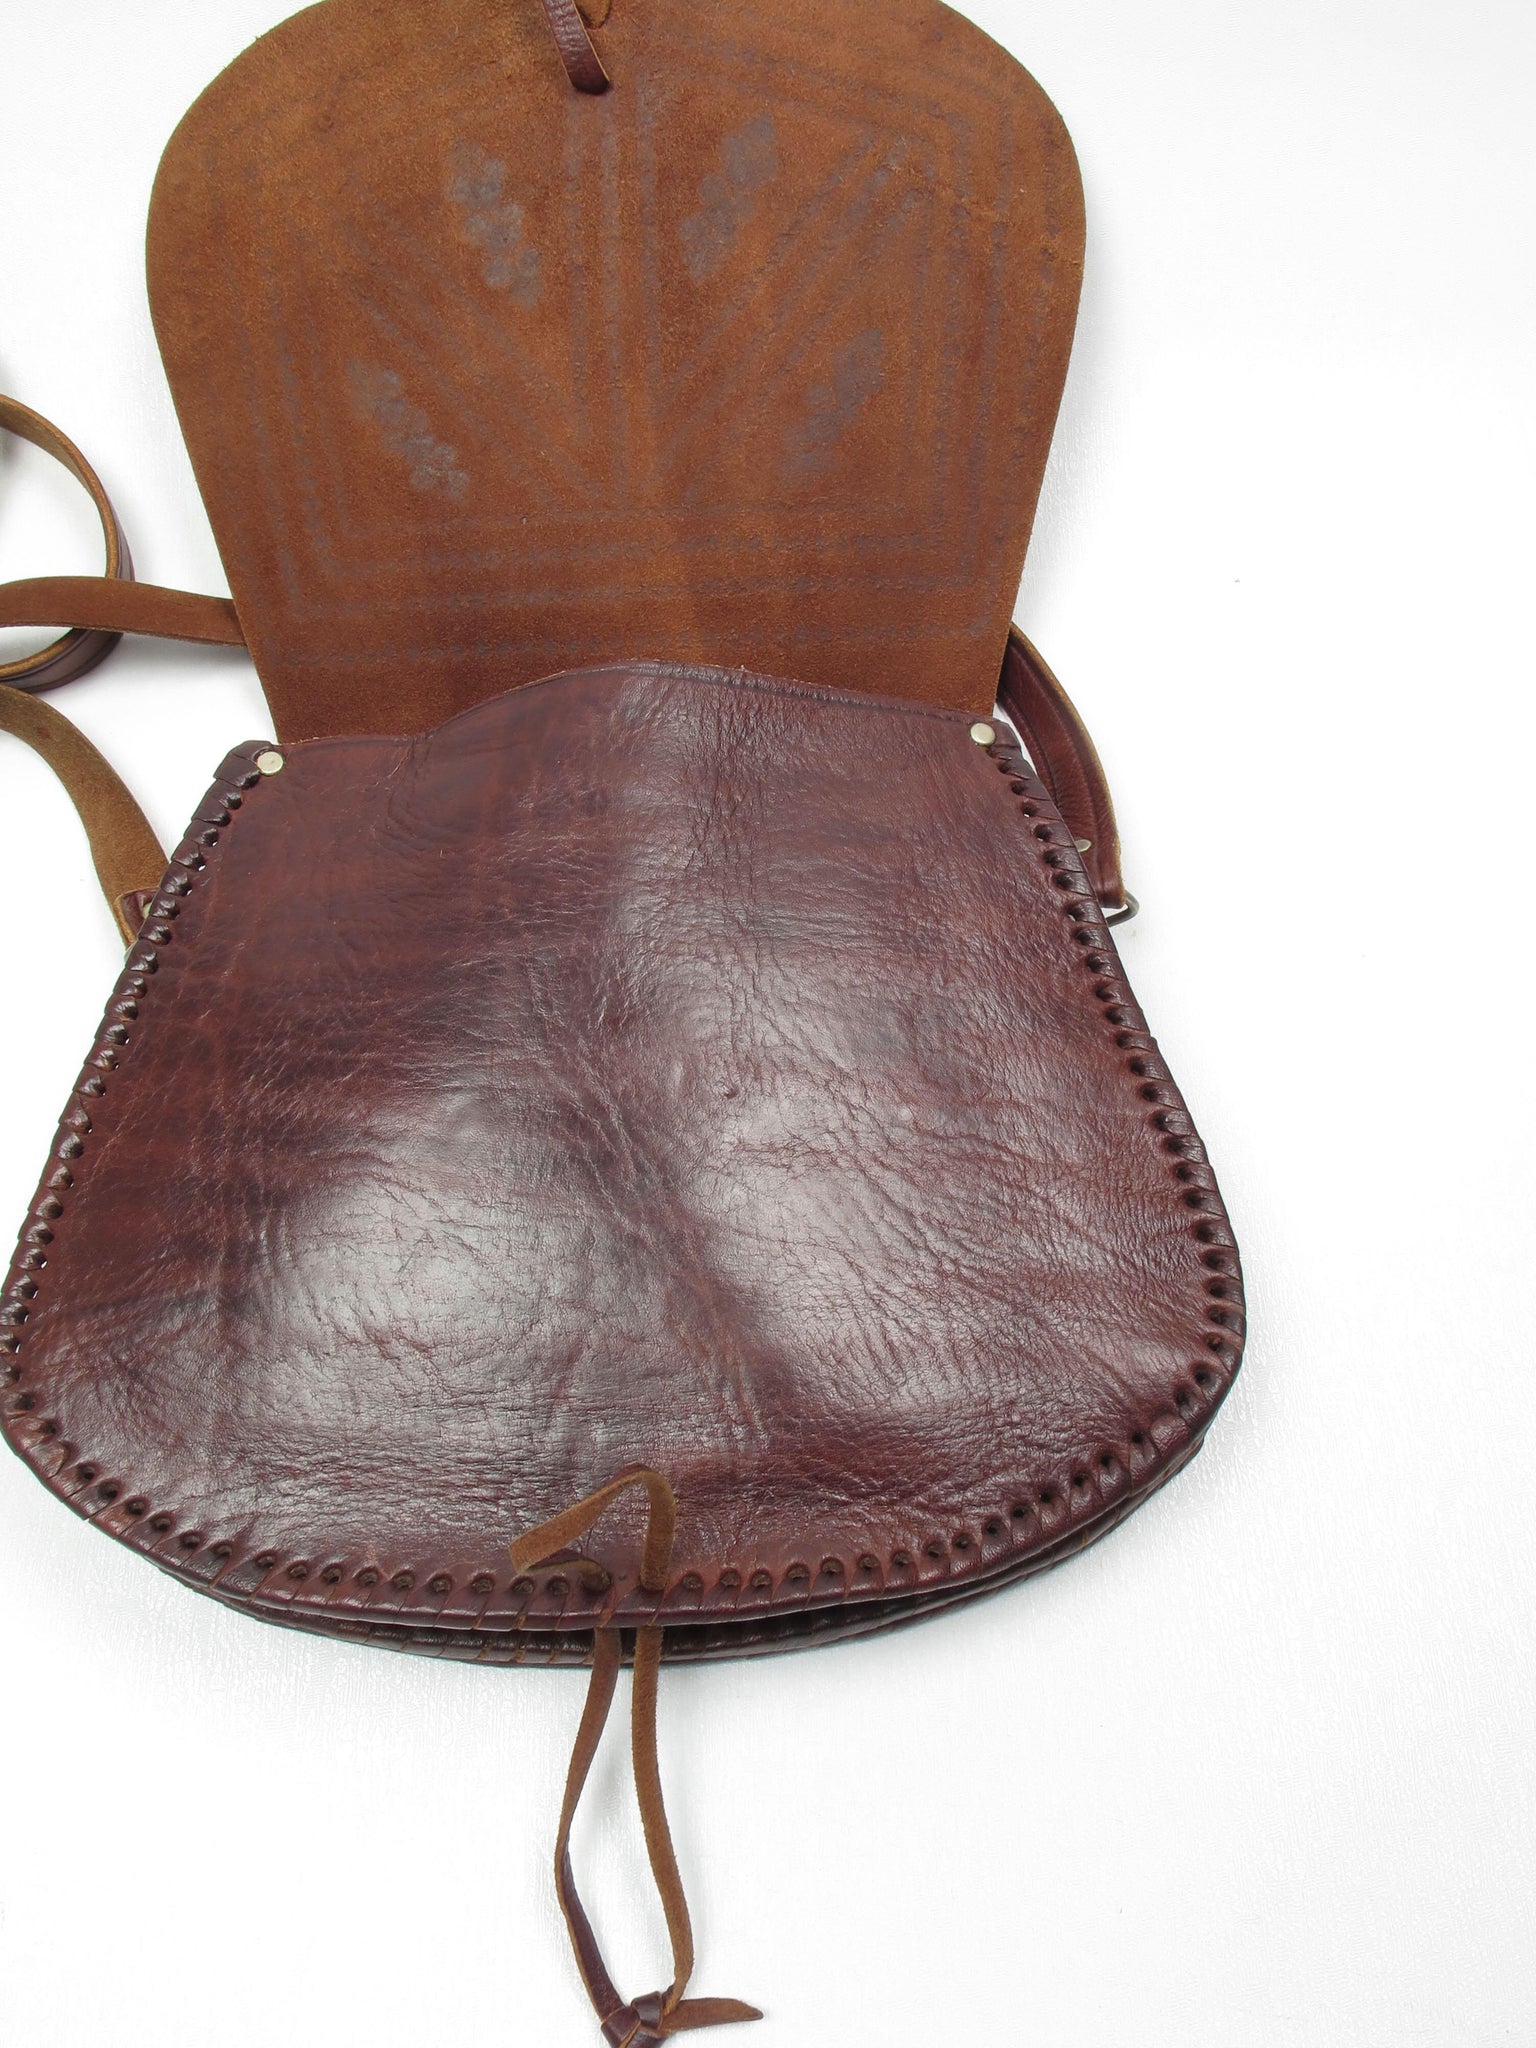 Brown Leather Tooled Bag